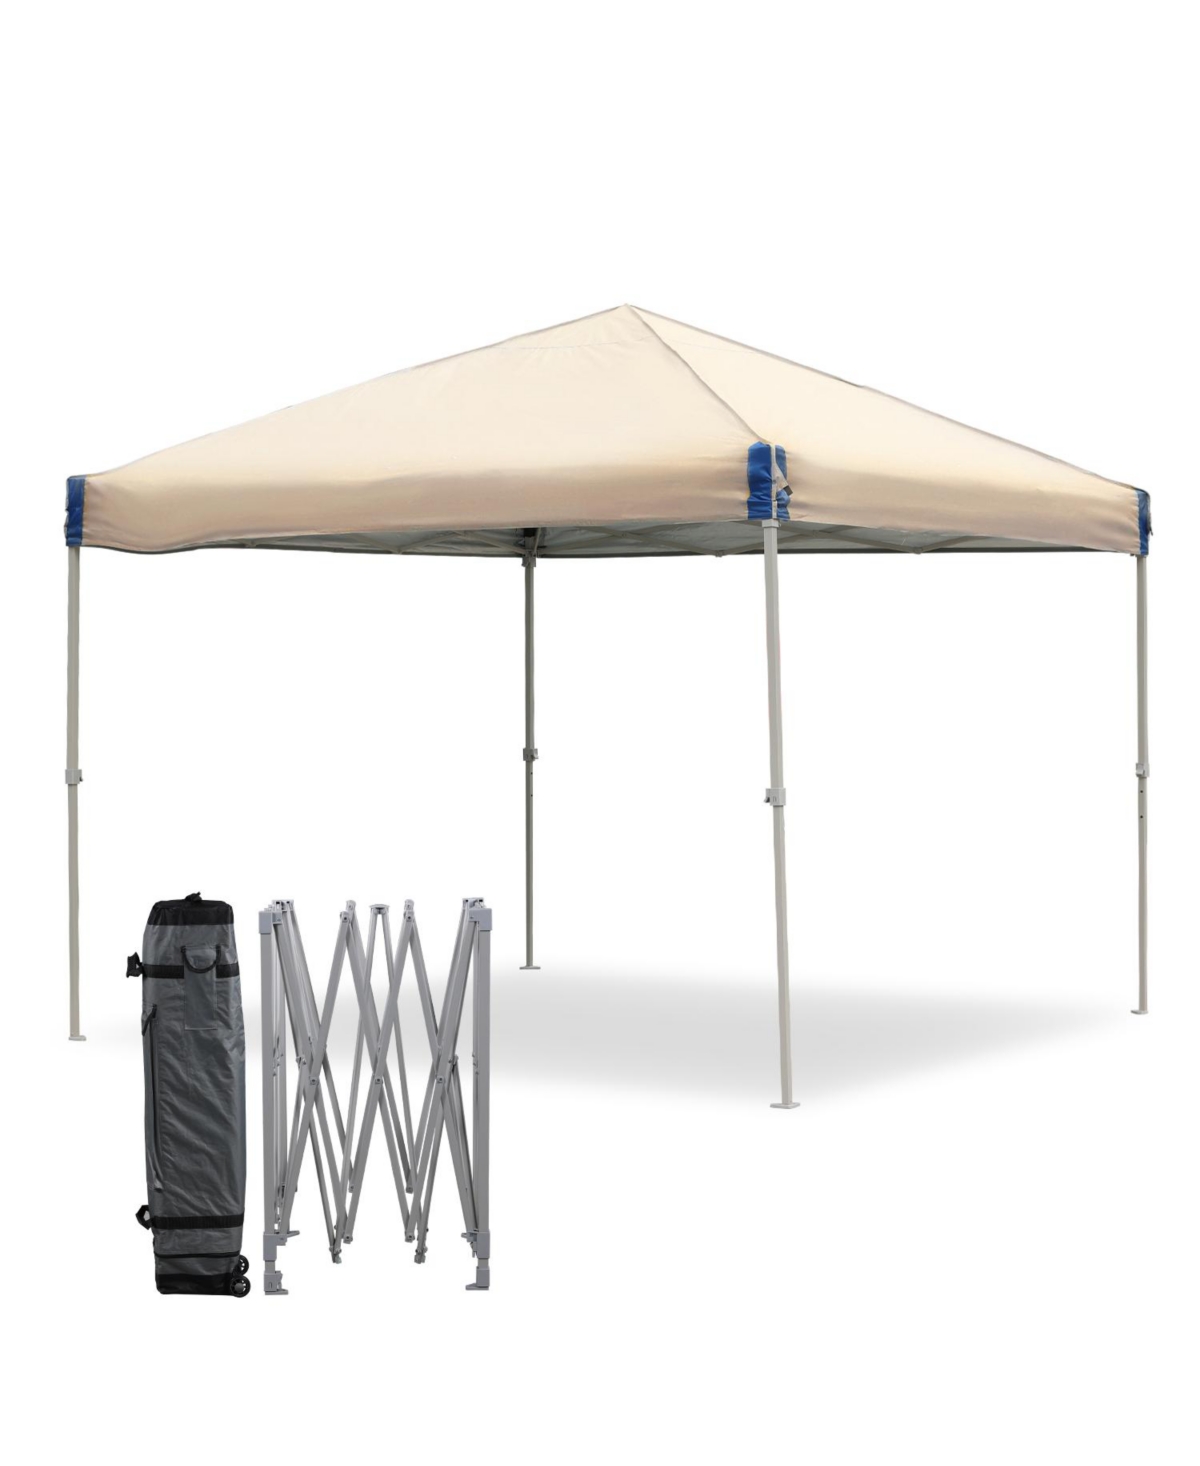 9.8' x 9.8' x 9' Pop Up Canopy Tent with Roller Bag, Portable Instant Shade Canopy - Brown